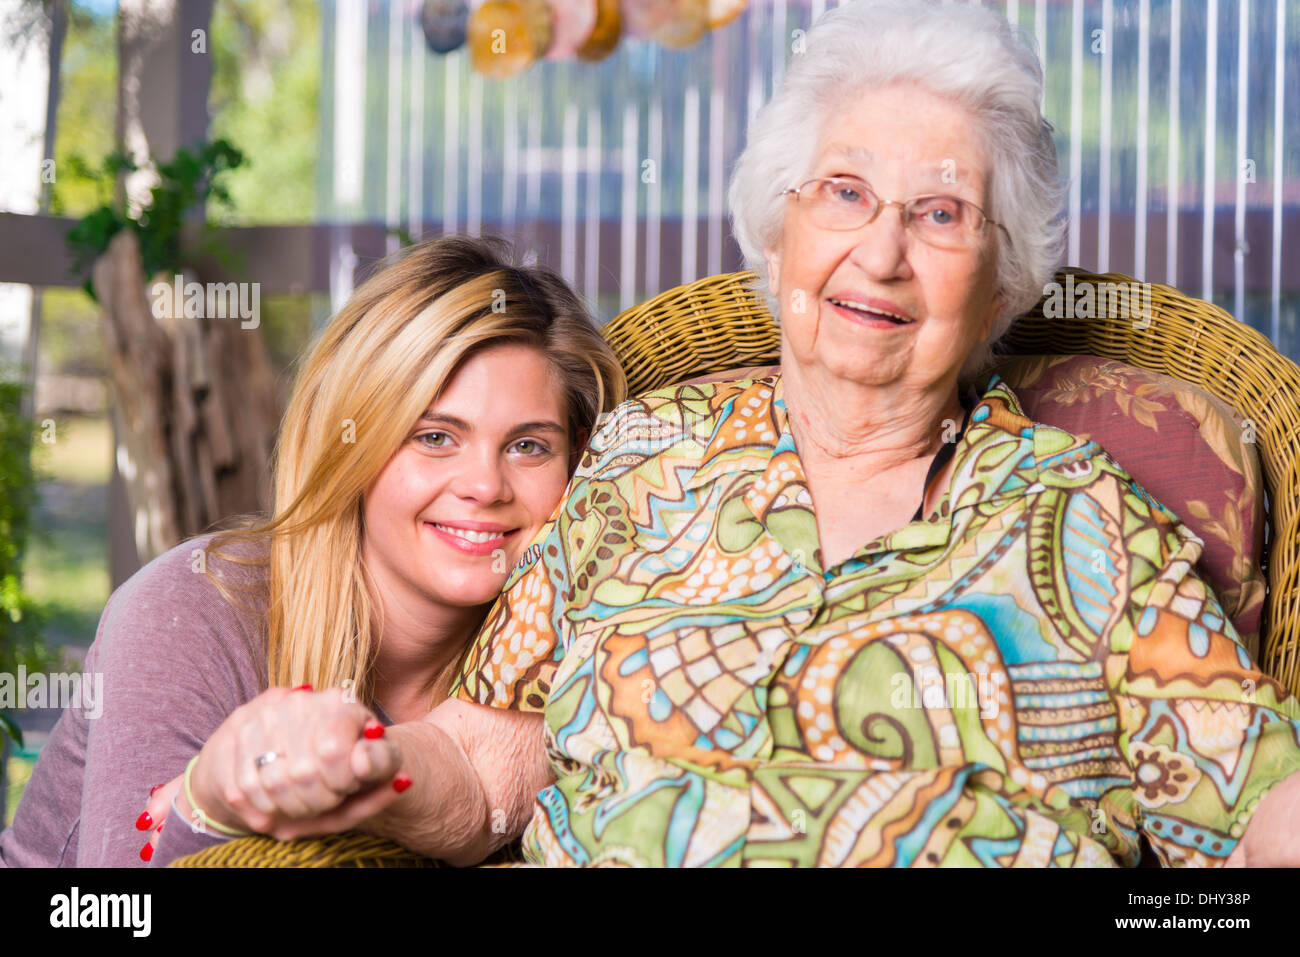 Portrait of great grandmother in her nineties with young attractive woman of 24 years. Caucasian ethnicity. Stock Photo